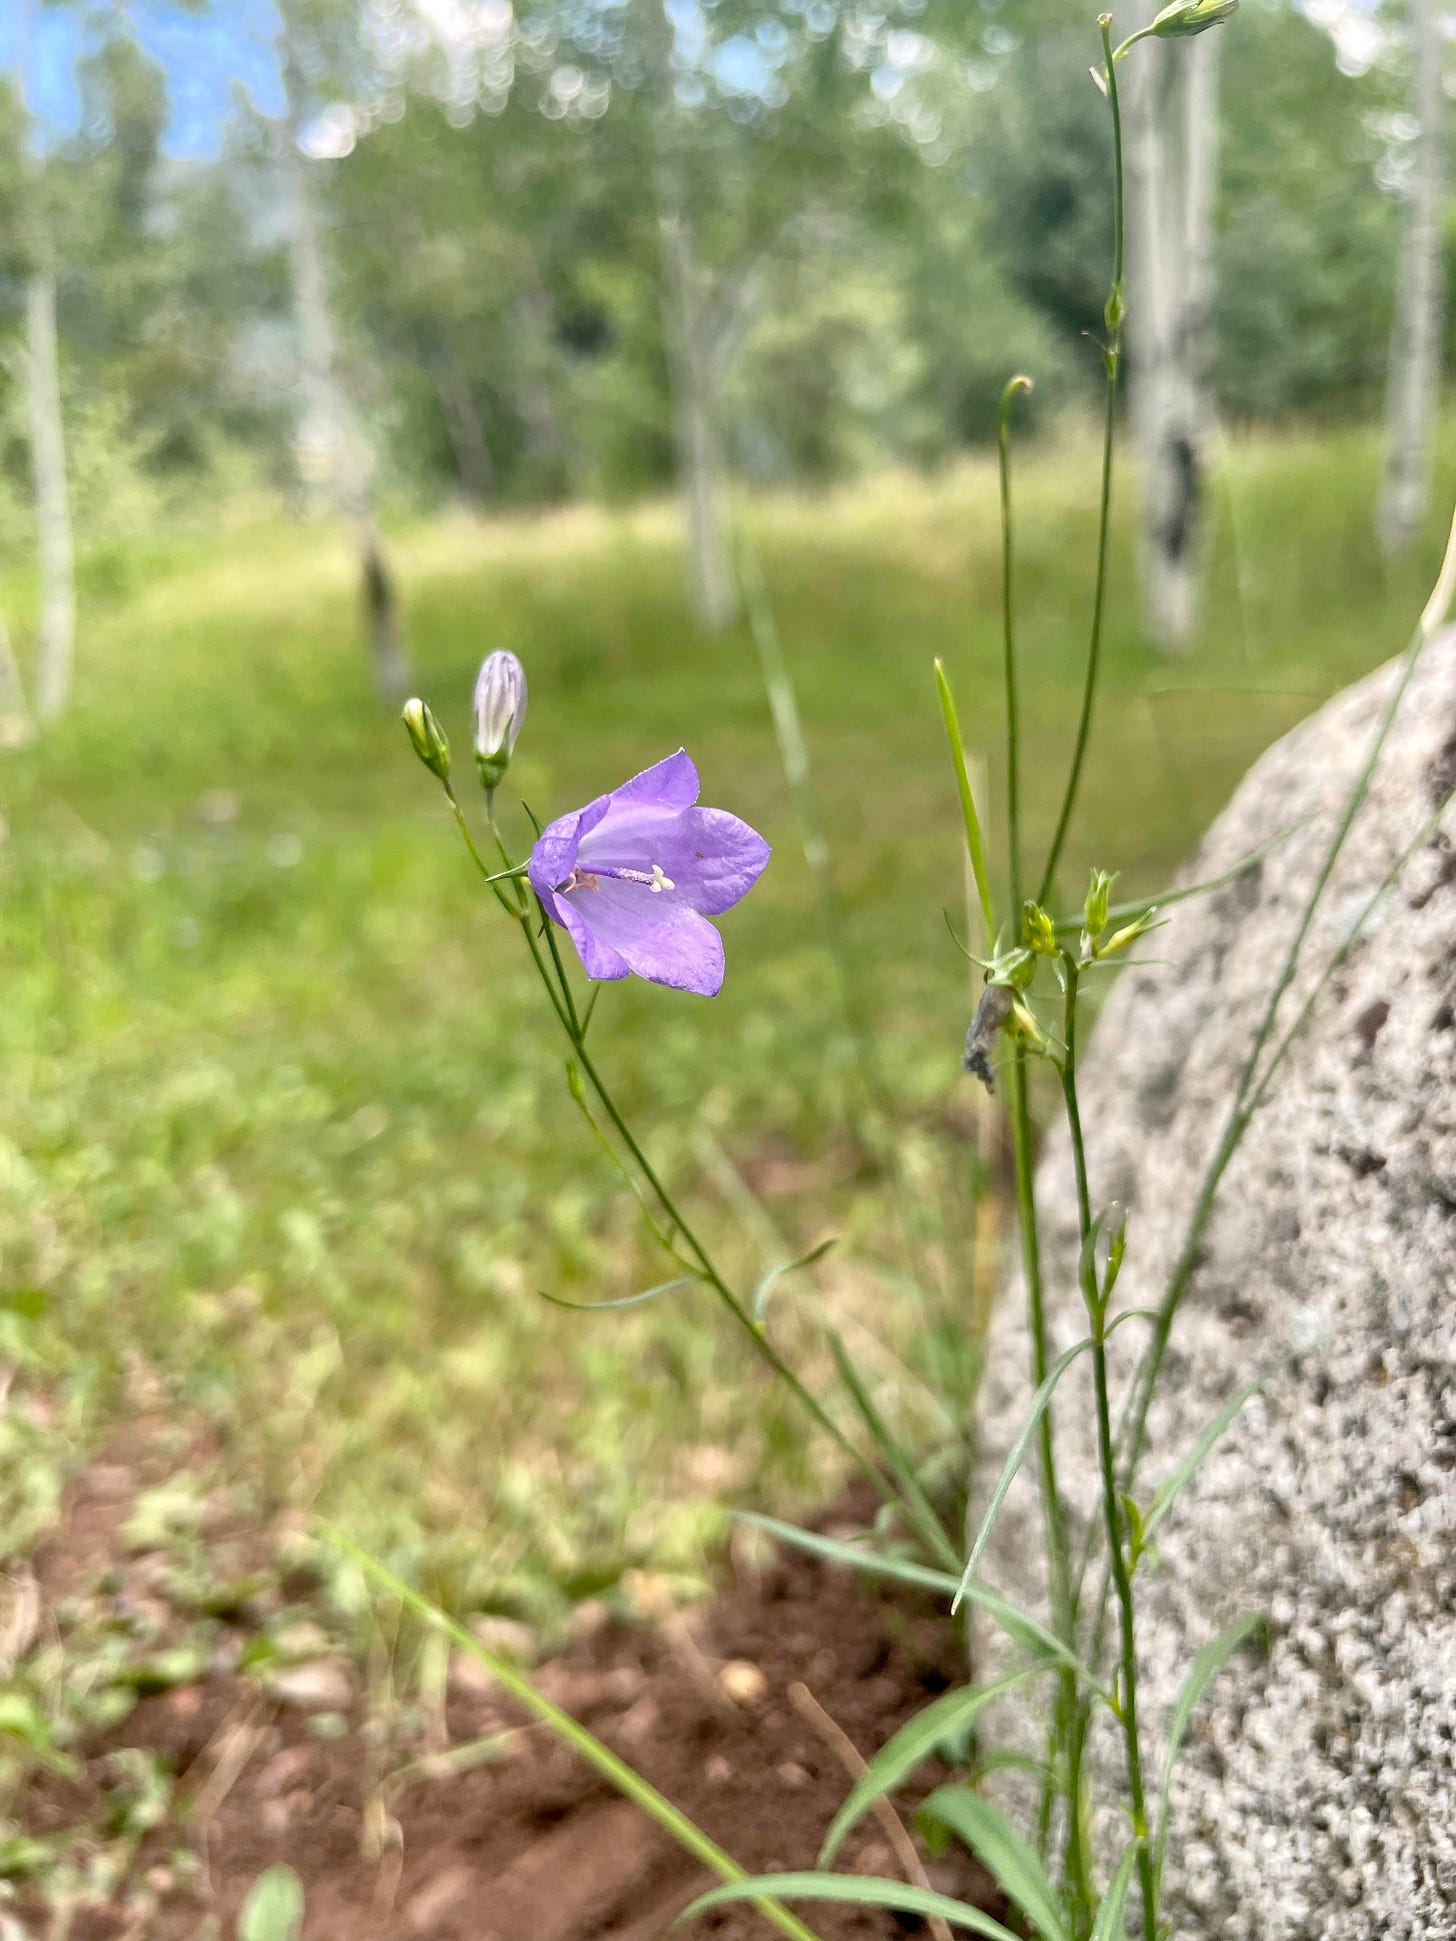 Photo of a wild blue violet  in an aspen grove at summertime